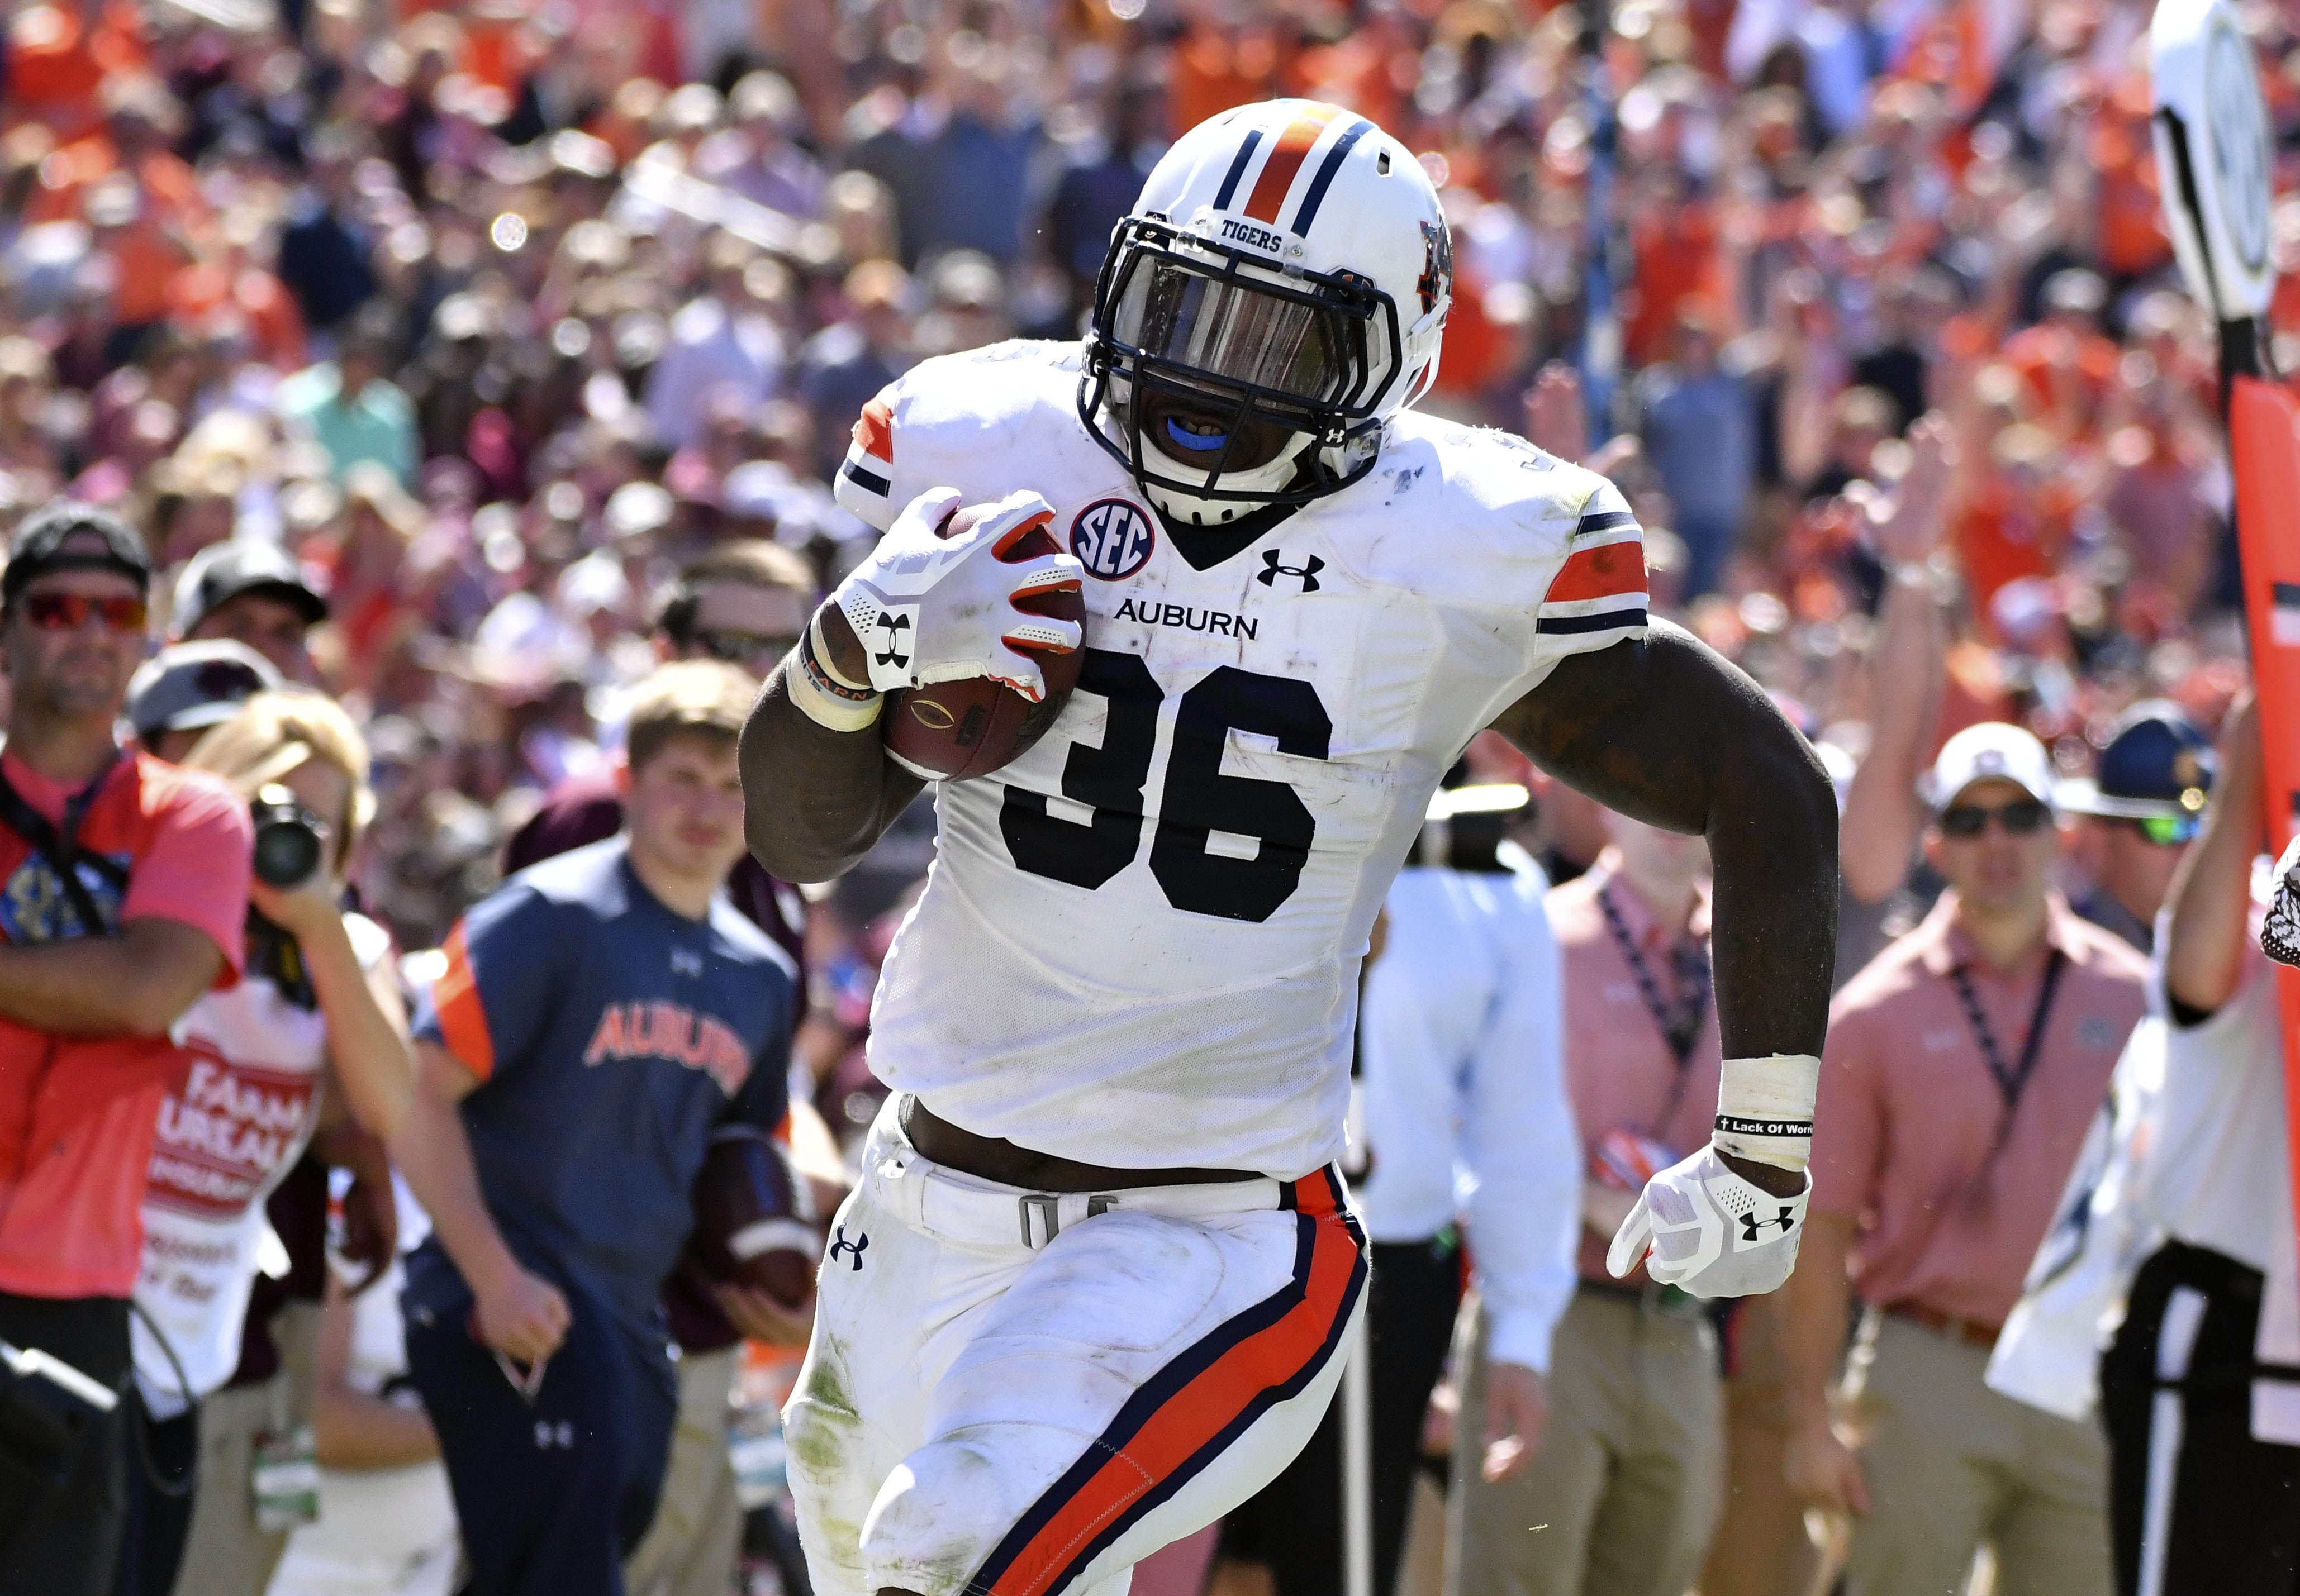 Oct 8, 2016; Starkville, MS, USA; Auburn Tigers running back Kamryn Pettway (36) runs the ball during the second quarter of the game against the Mississippi State Bulldogs at Davis Wade Stadium. Mandatory Credit: Matt Bush-USA TODAY Sports